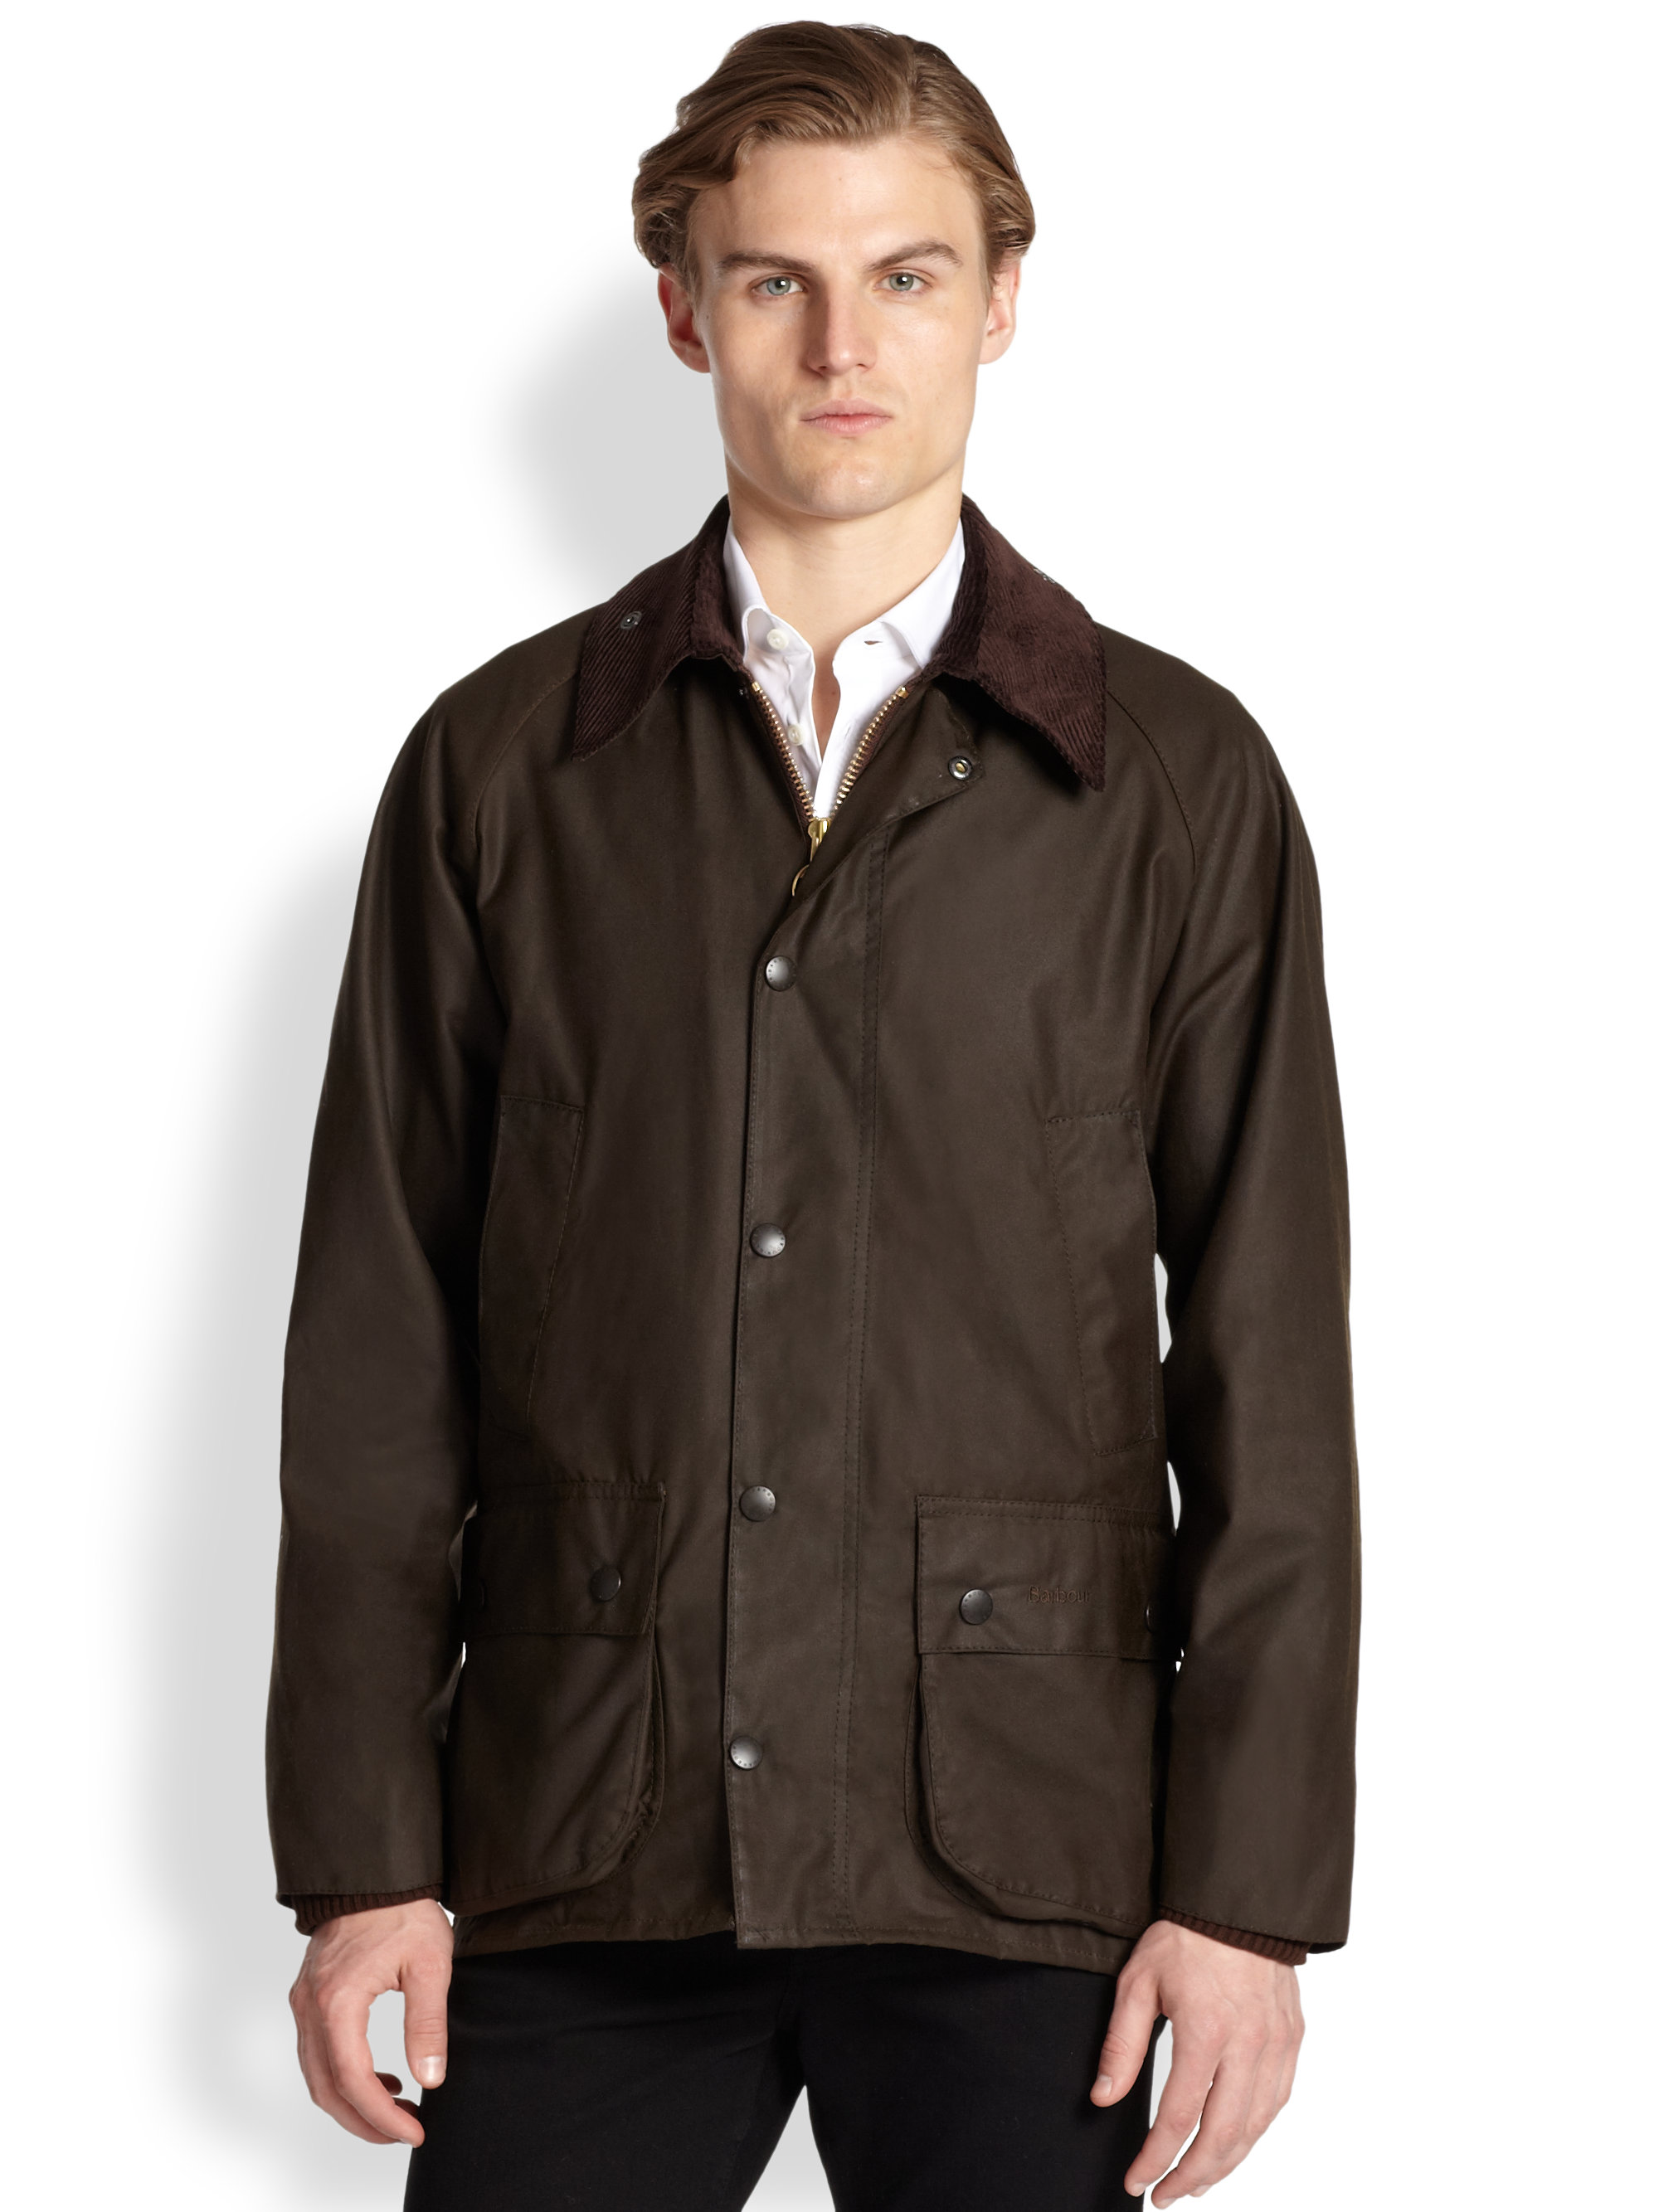 Lyst - Barbour Beaufort Waxed Cotton Jacket in Green for Men